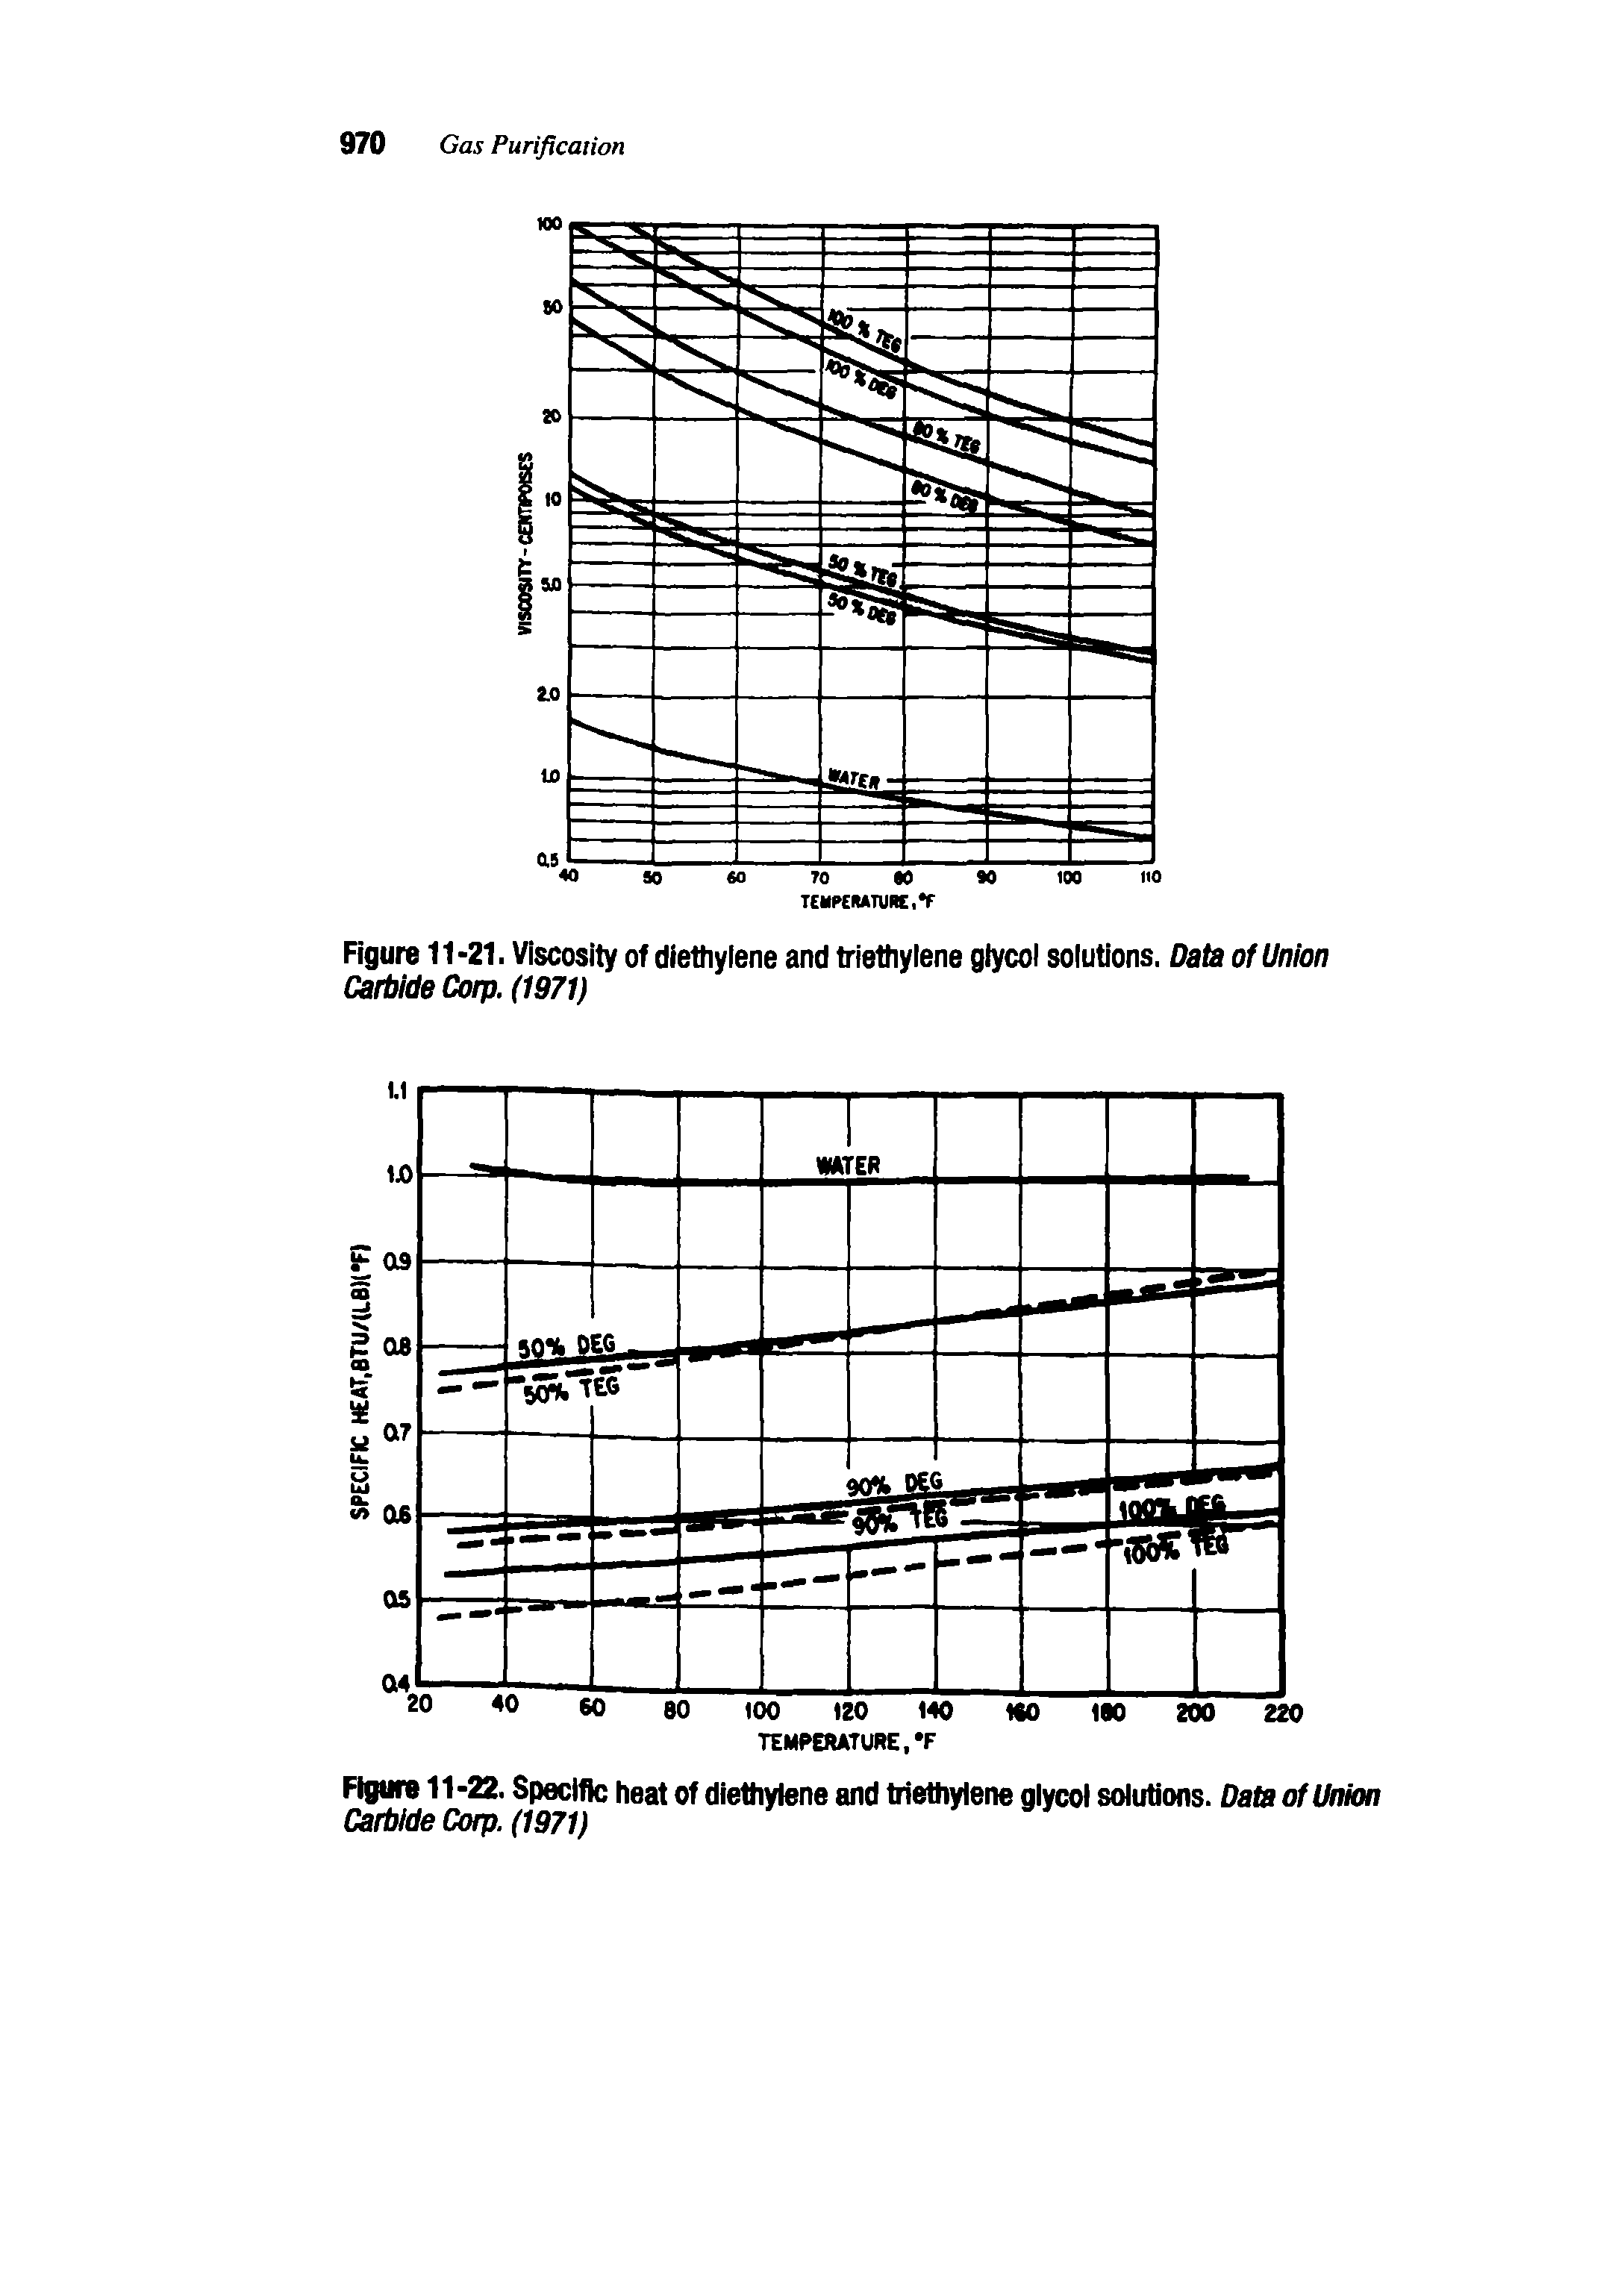 Figure 11 21. Viscosity of diethylene and triethylene glycol solutions. Data of Union Carbide Corp. (1971)...